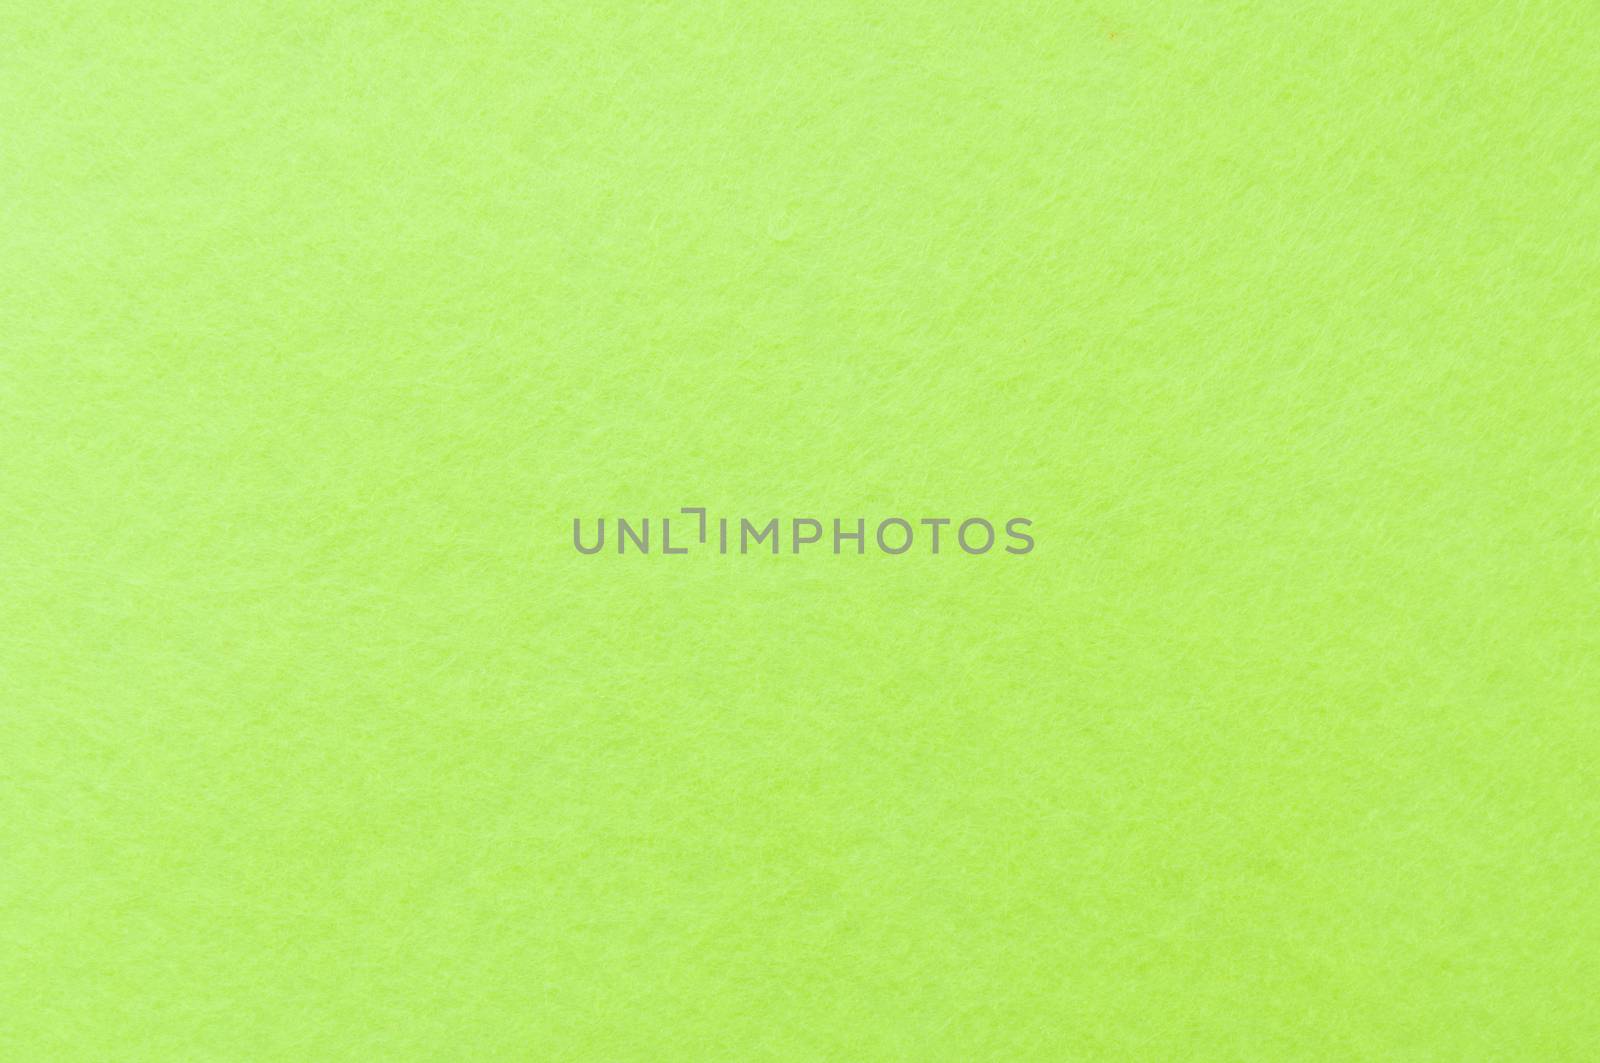 Texture background of Light Green velvet or flannel Fabric  by thampapon